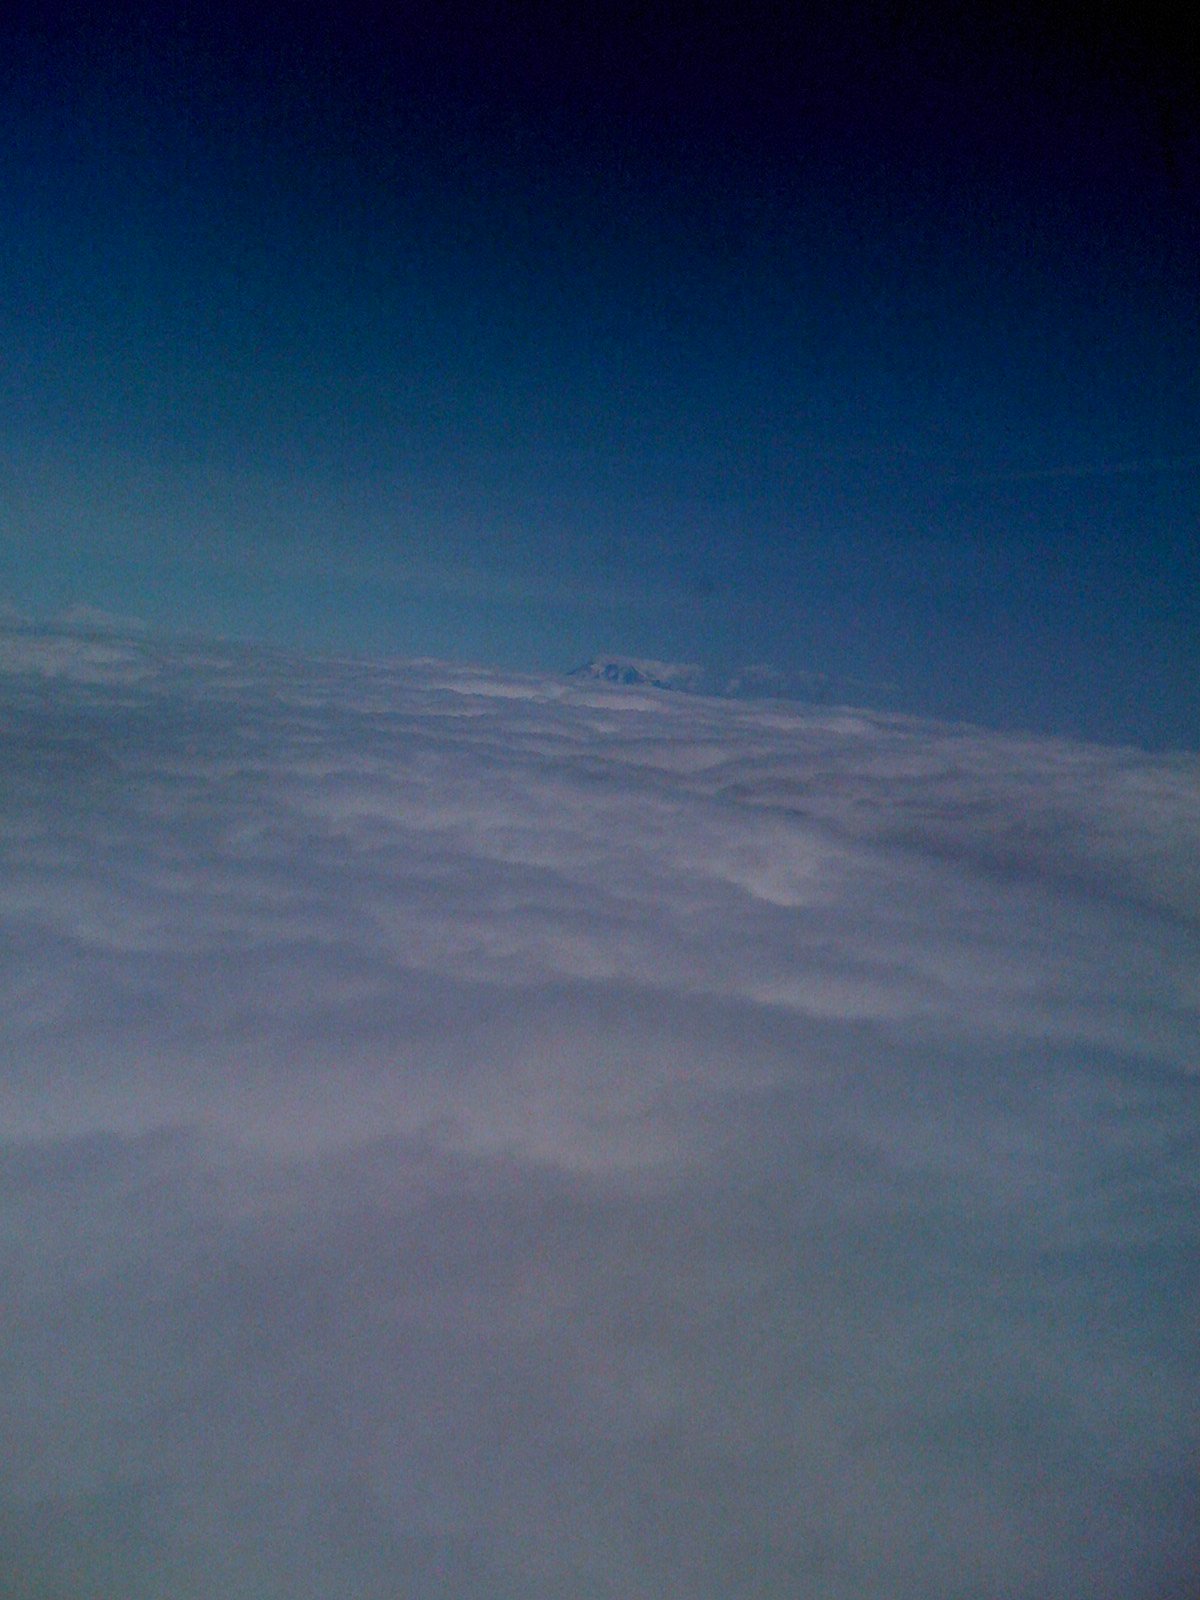 Hood from the plane